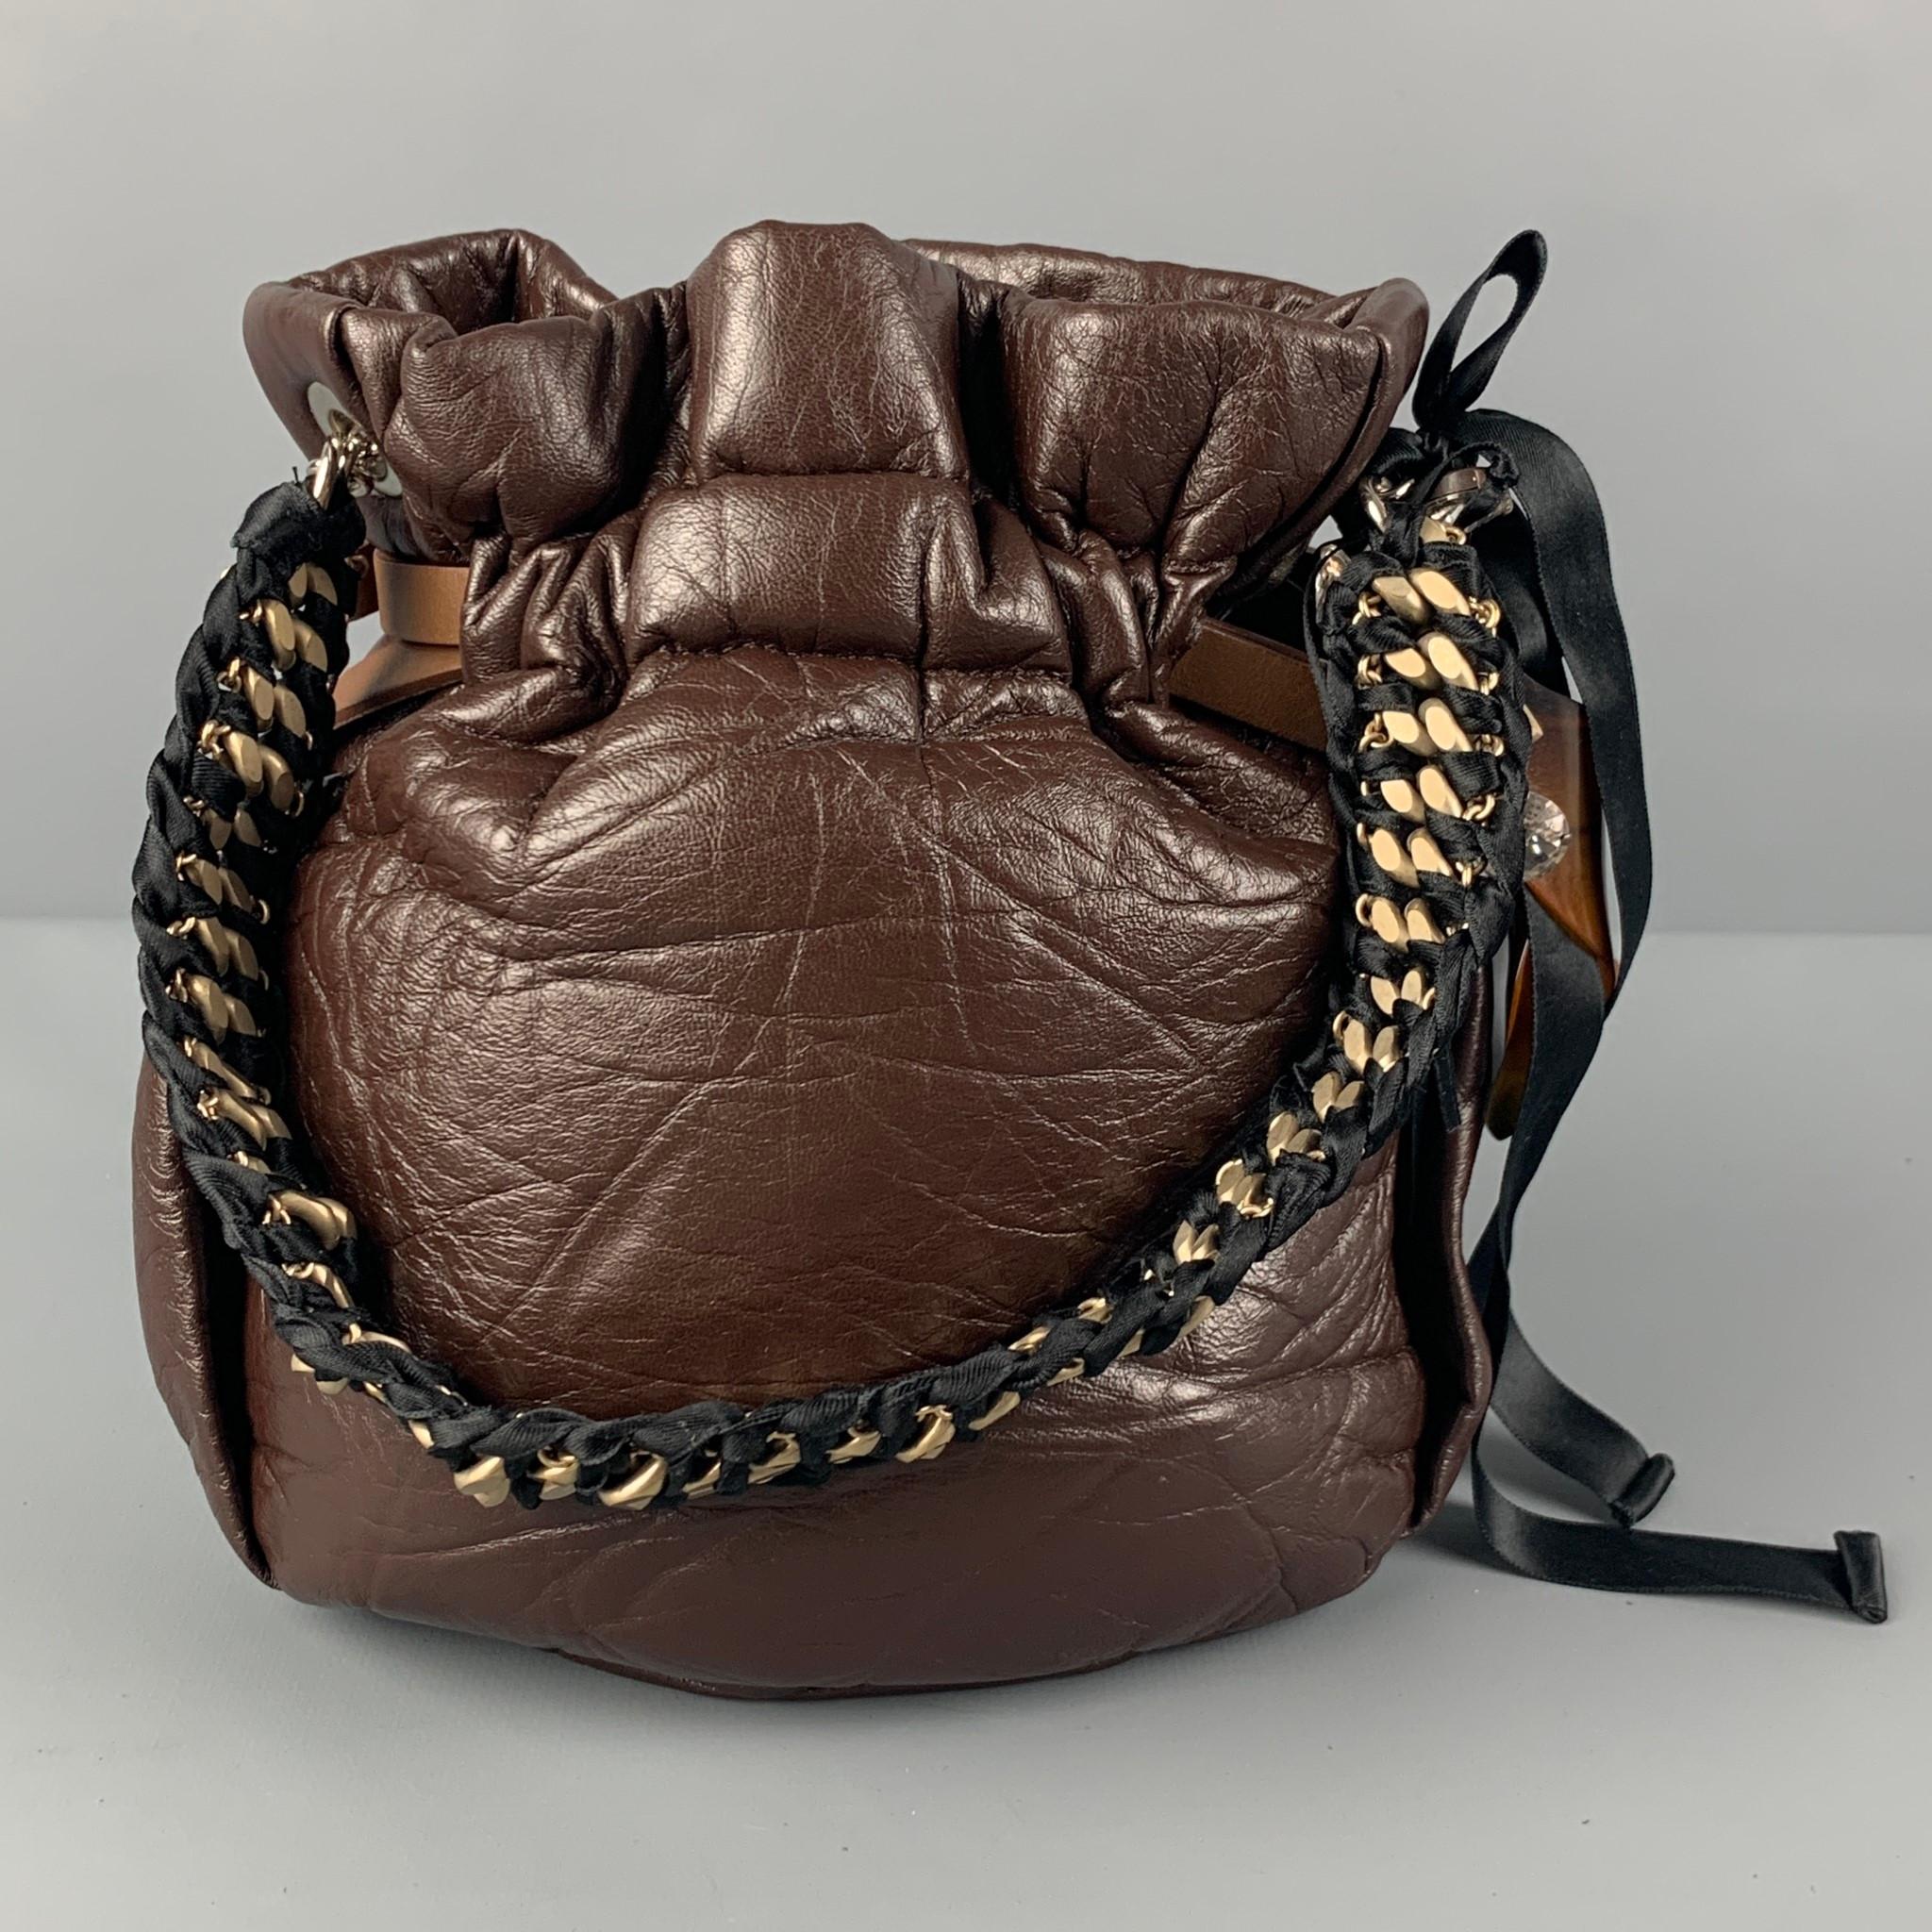 MARNI handbag comes in a brown wrinkle leather featuring a charm detail, woven handle, and a adjustable strap closure. Comes with dust bag. Made in Italy.

Very Good Pre-Owned Condition.

Measurements:

Length: 7.5 in.
Width: 3 in.
Height: 8